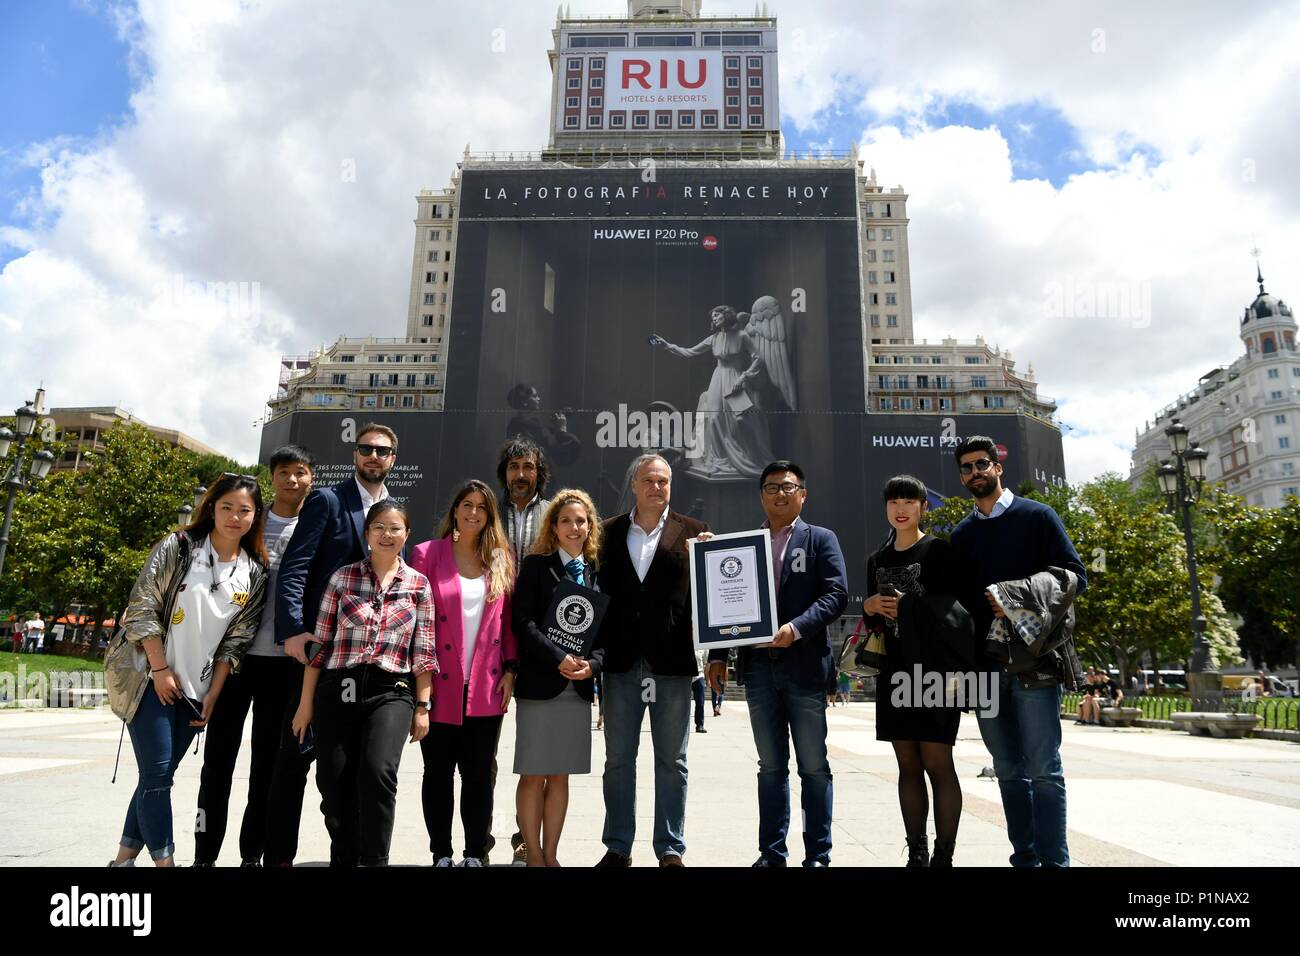 Madrid, Spain. 12th June, 2018. People pose for photos with the Guinness World Record certificate in front of the Huawei P20 Pro advertisement outside a building in Madrid, Spain, June 12, 2018. Huawei on Tuesday received a Guinness World Record certificate for 'the largest scaffold banner in the world'. Credit: Guo Qiuda/Xinhua/Alamy Live News Stock Photo